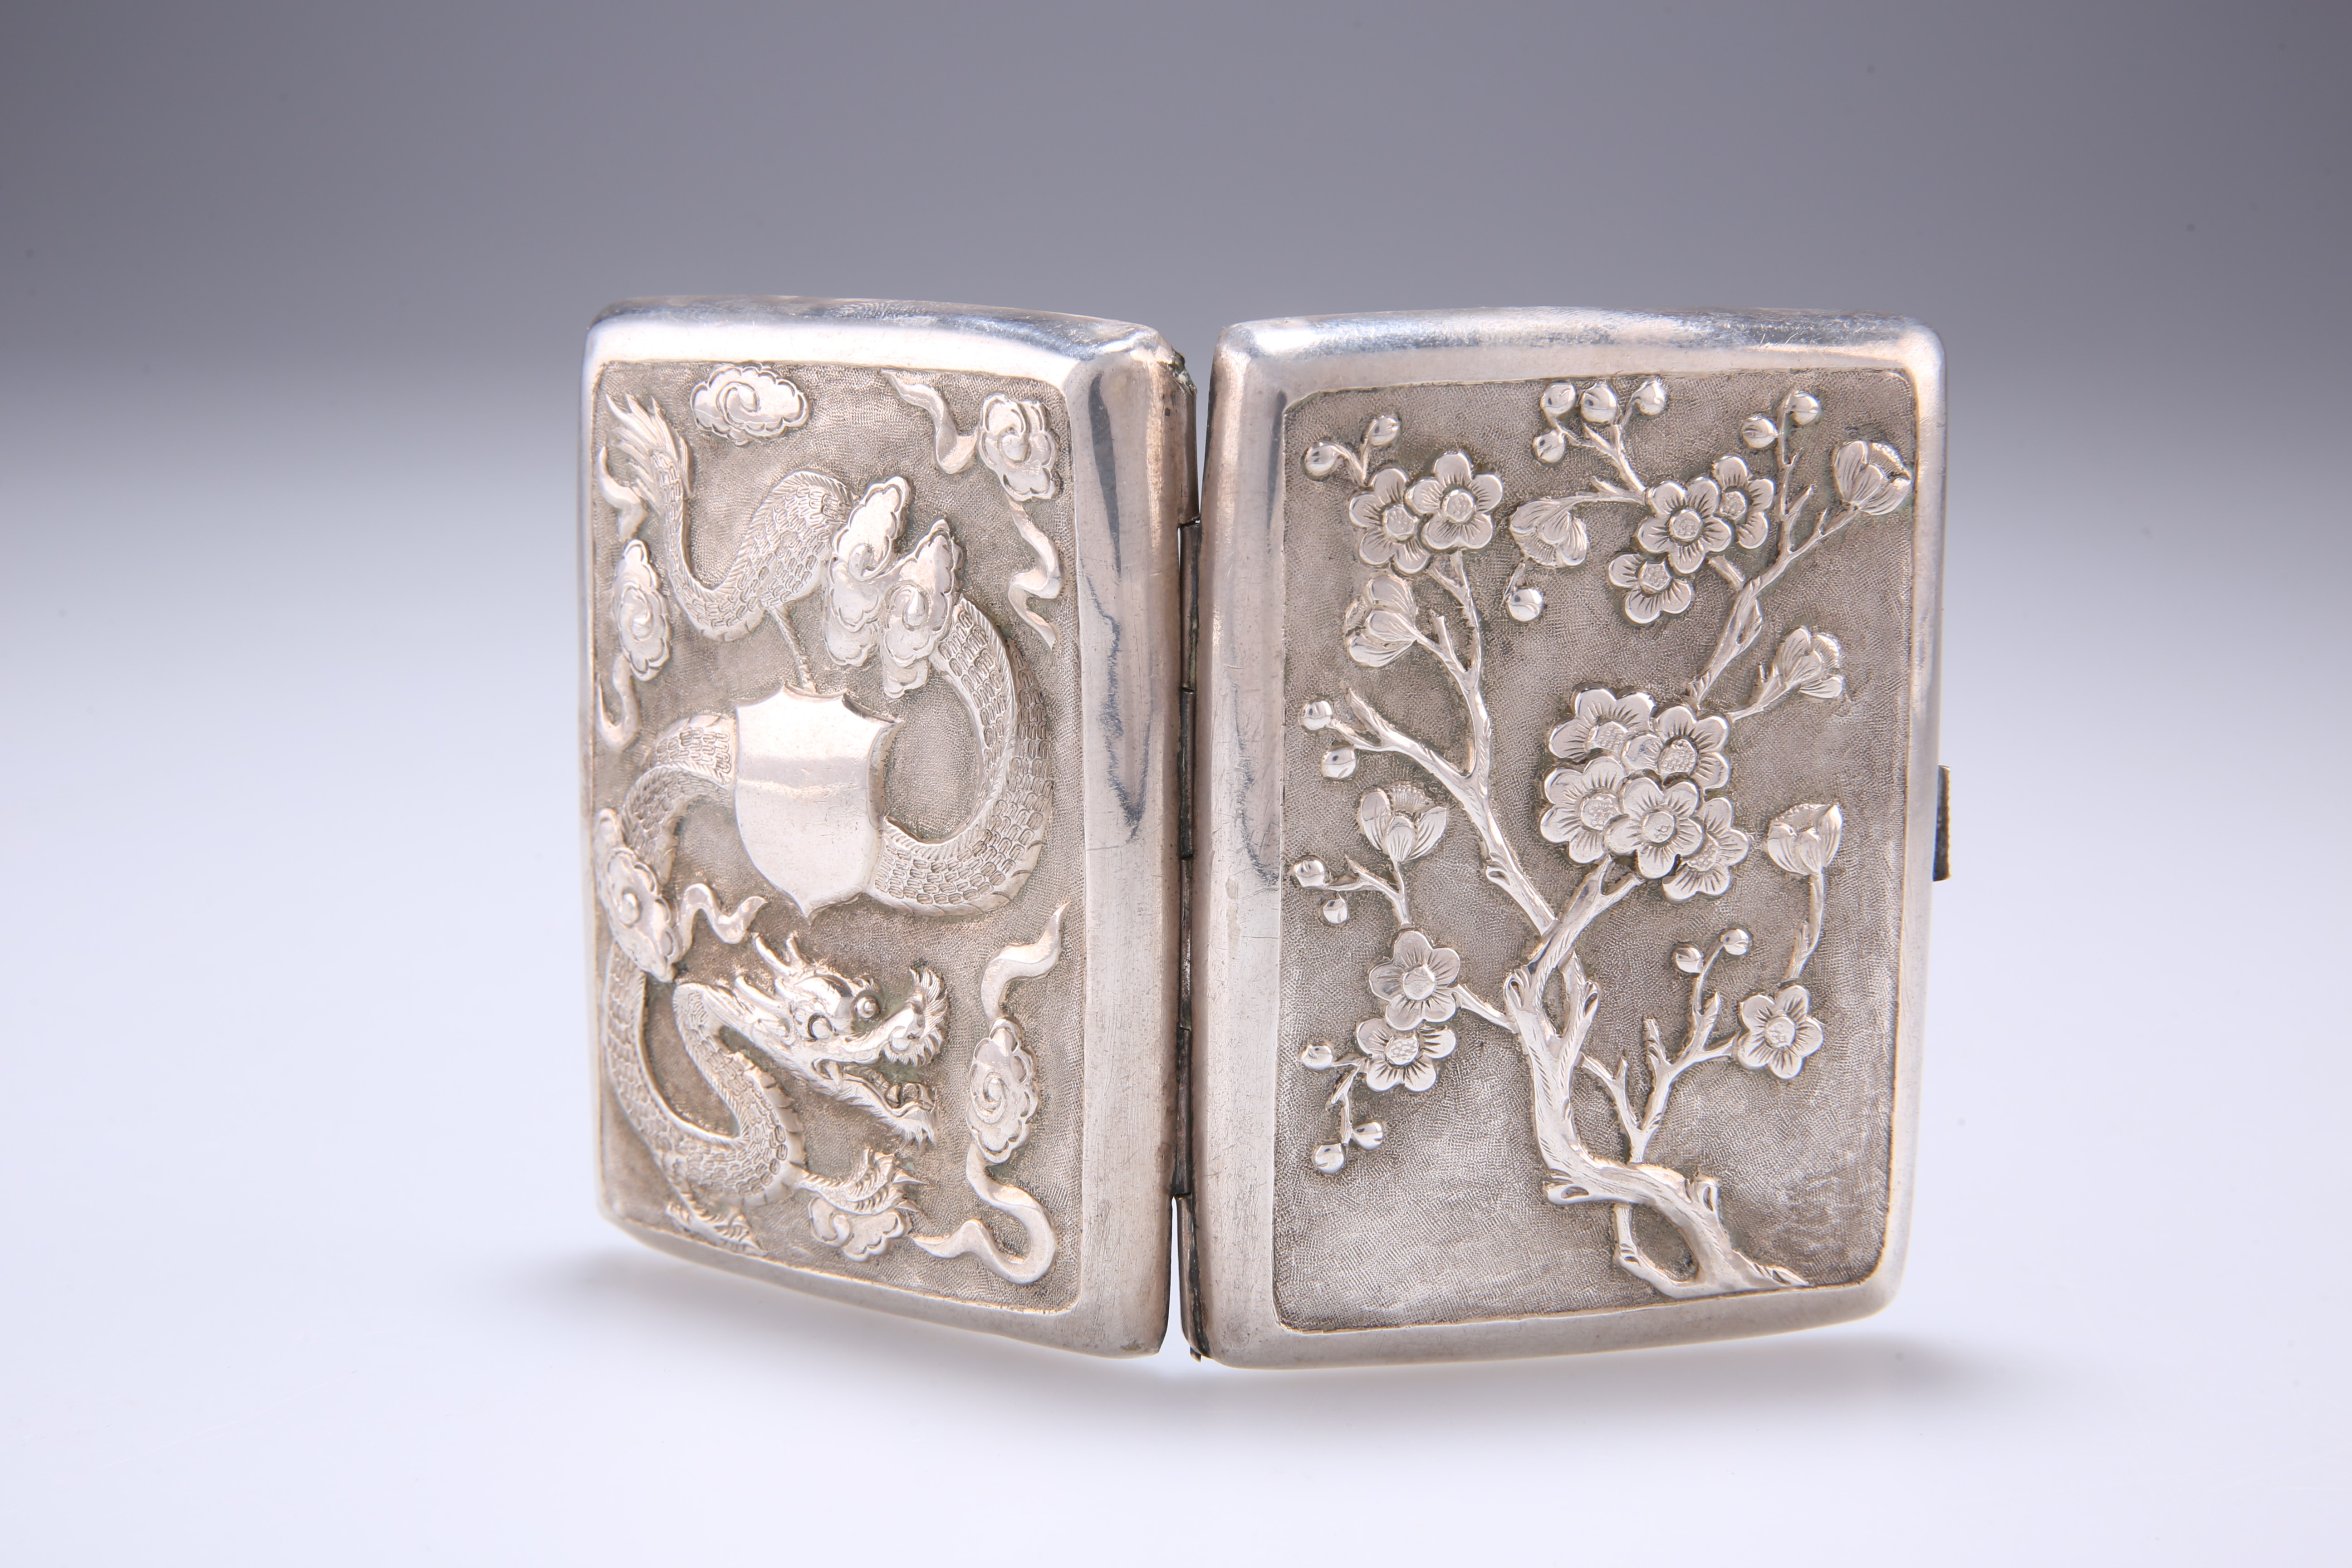 A CHINESE WHITE METAL CIGARETTE CASE, LATE 19TH CENTURY